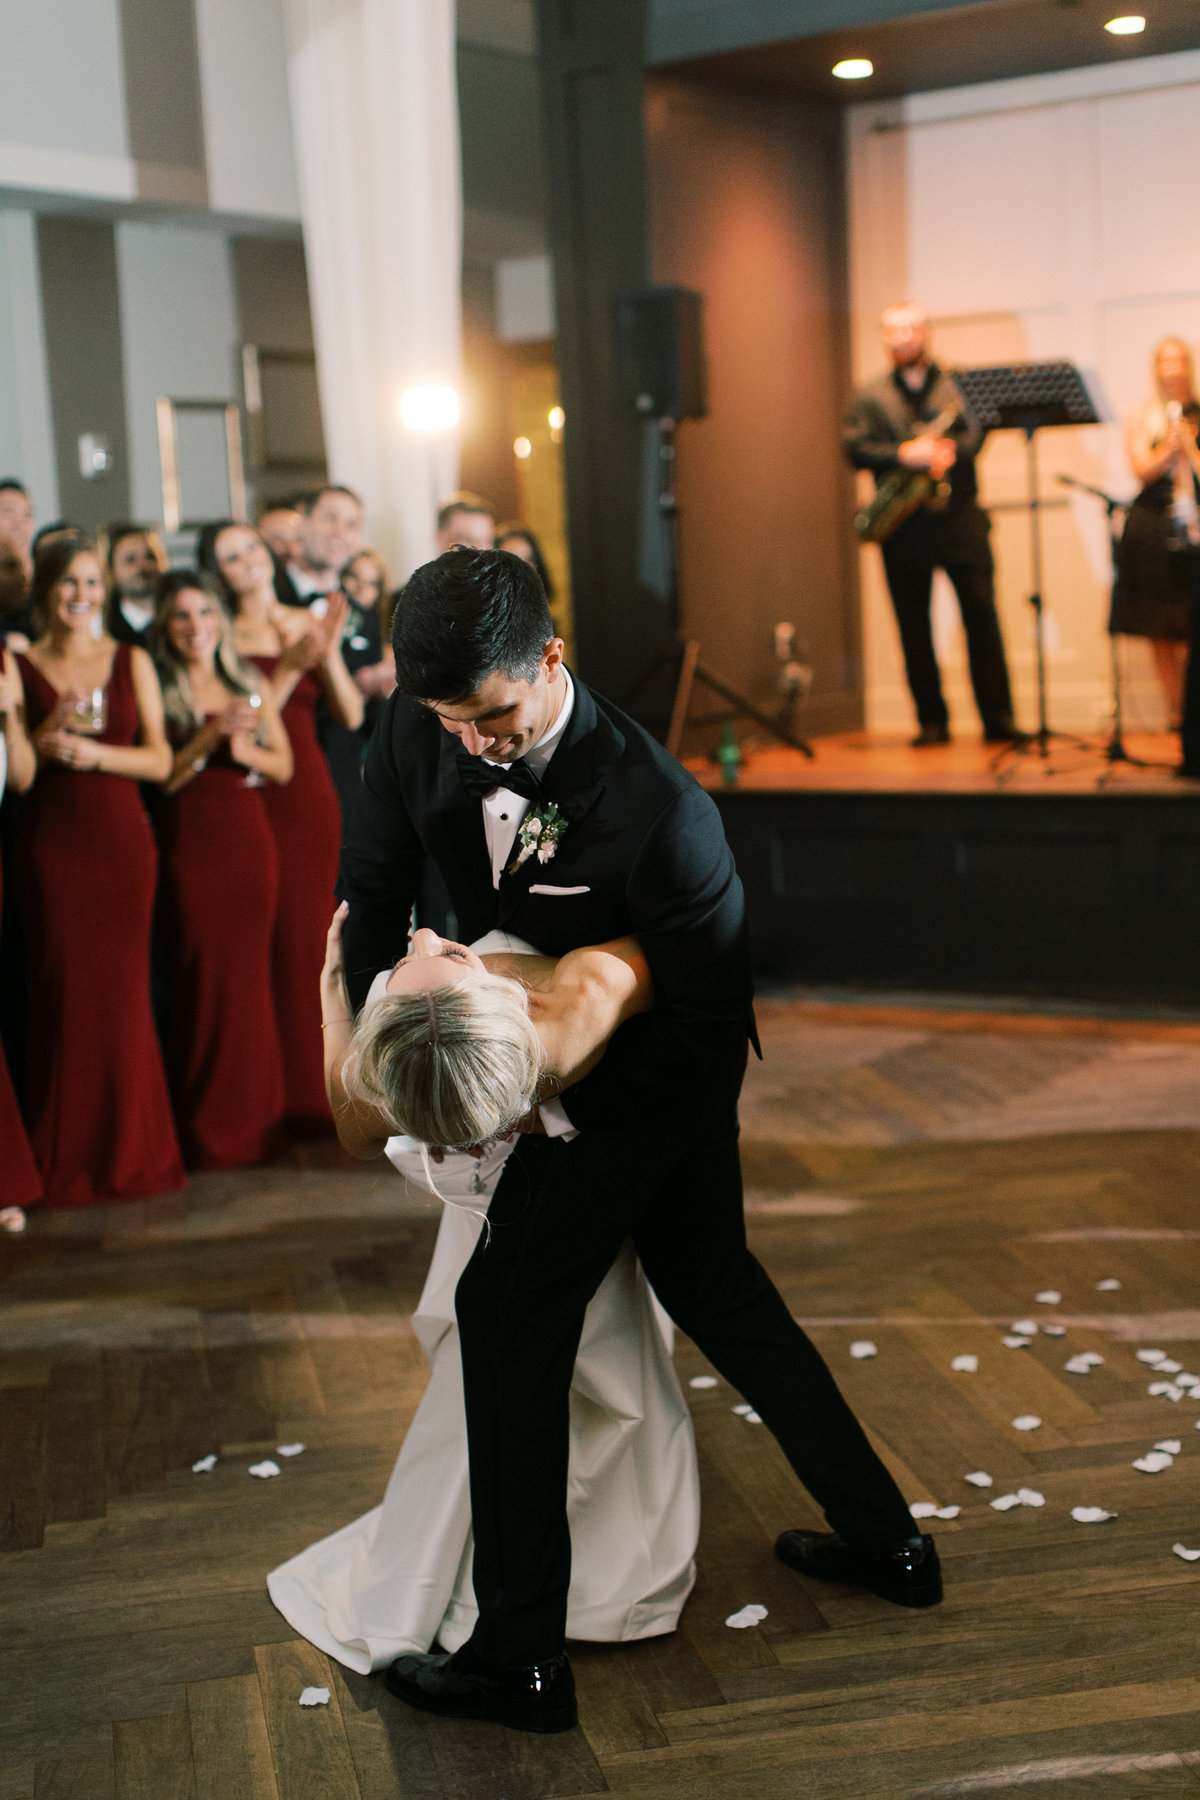 groom dipping bride while dancing during first dance